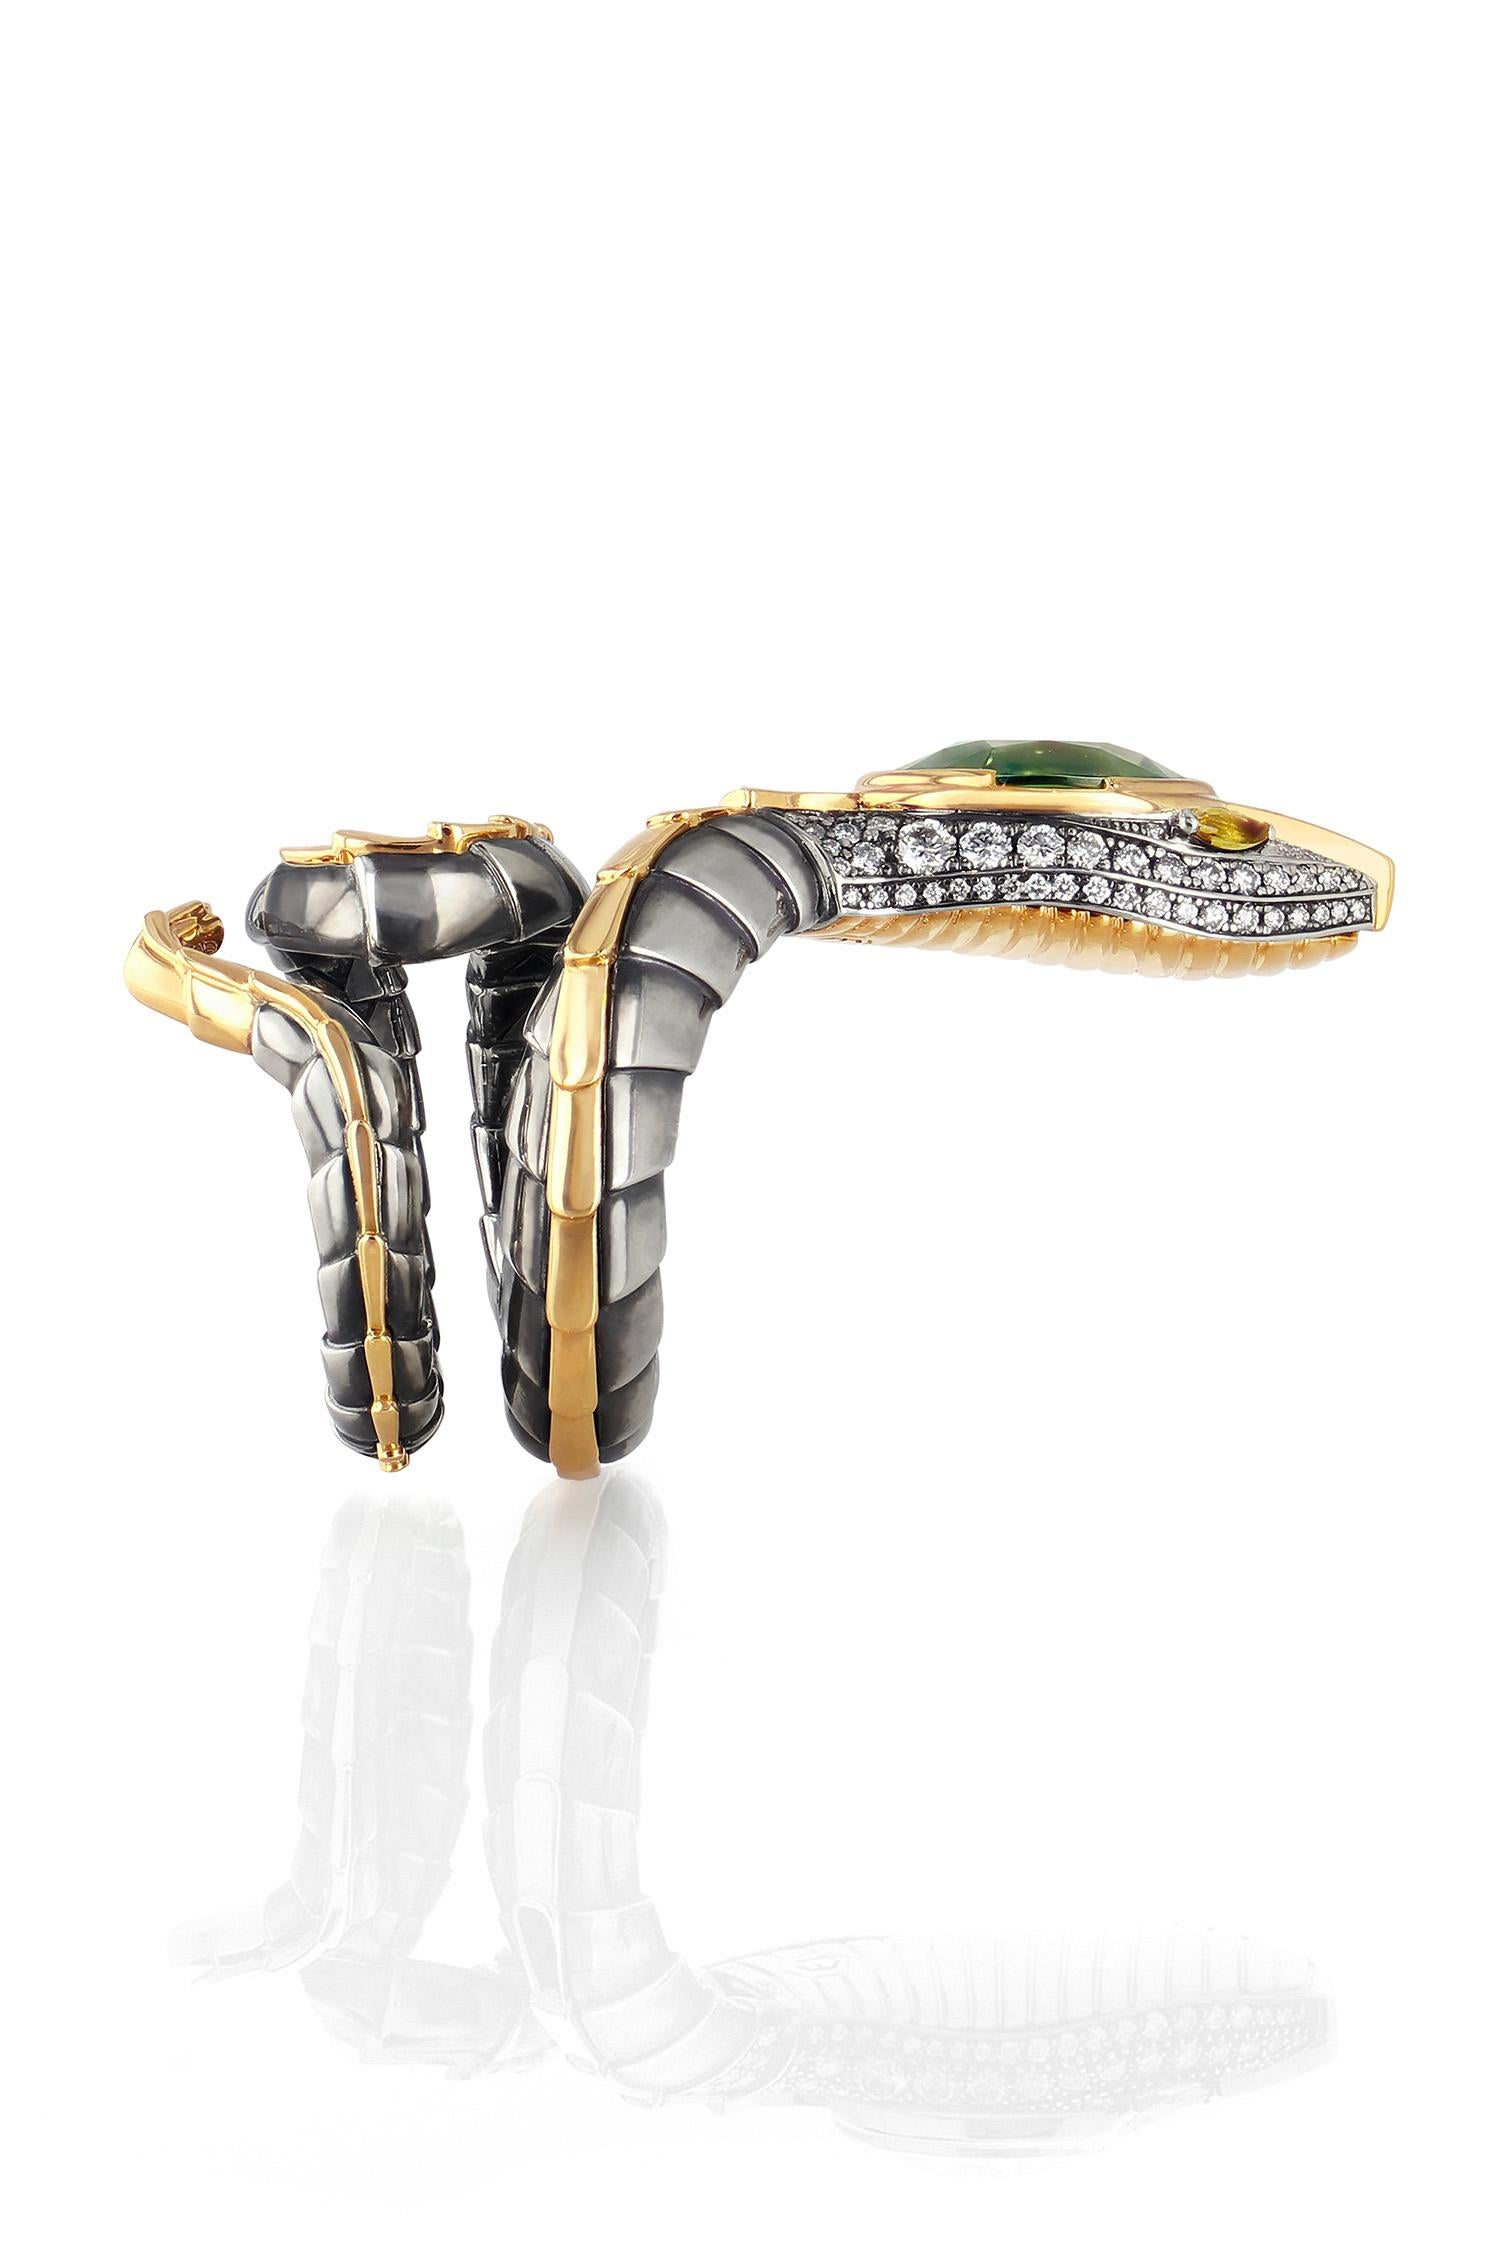 Neoclassical Tourmaline Serpent Ring in 18k Yellow Gold by Elie Top For Sale